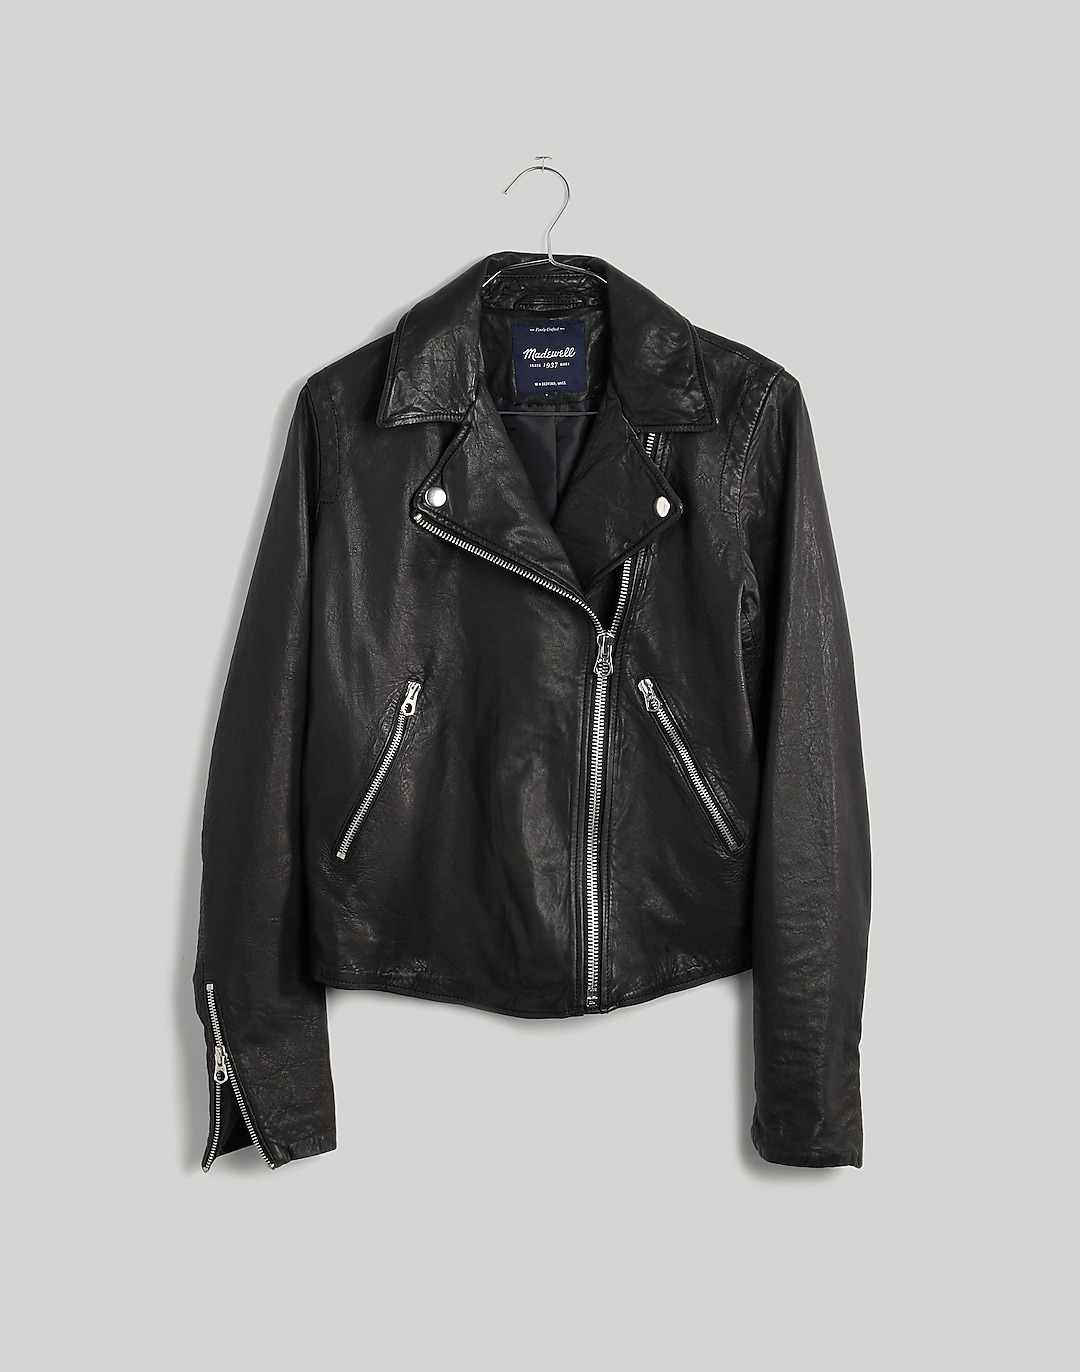 MADEWELL | The Washed Leather Motorcycle Jacket